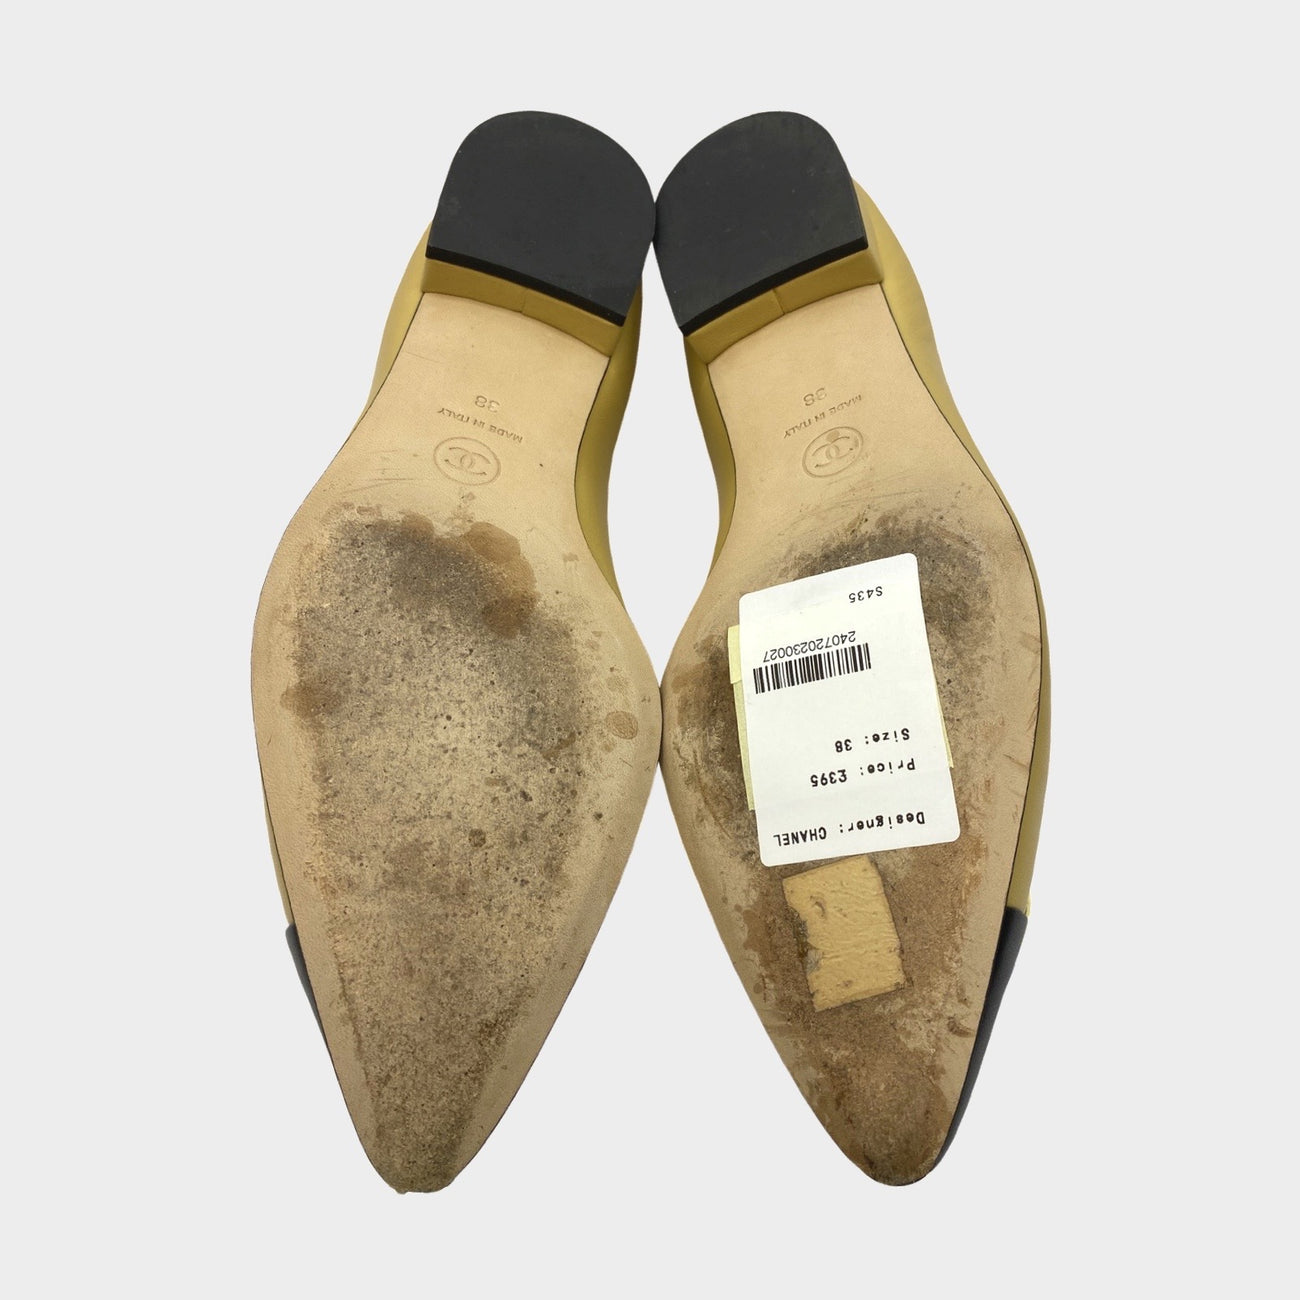 Chanel women's beige and black leather ballet flats with Camelia